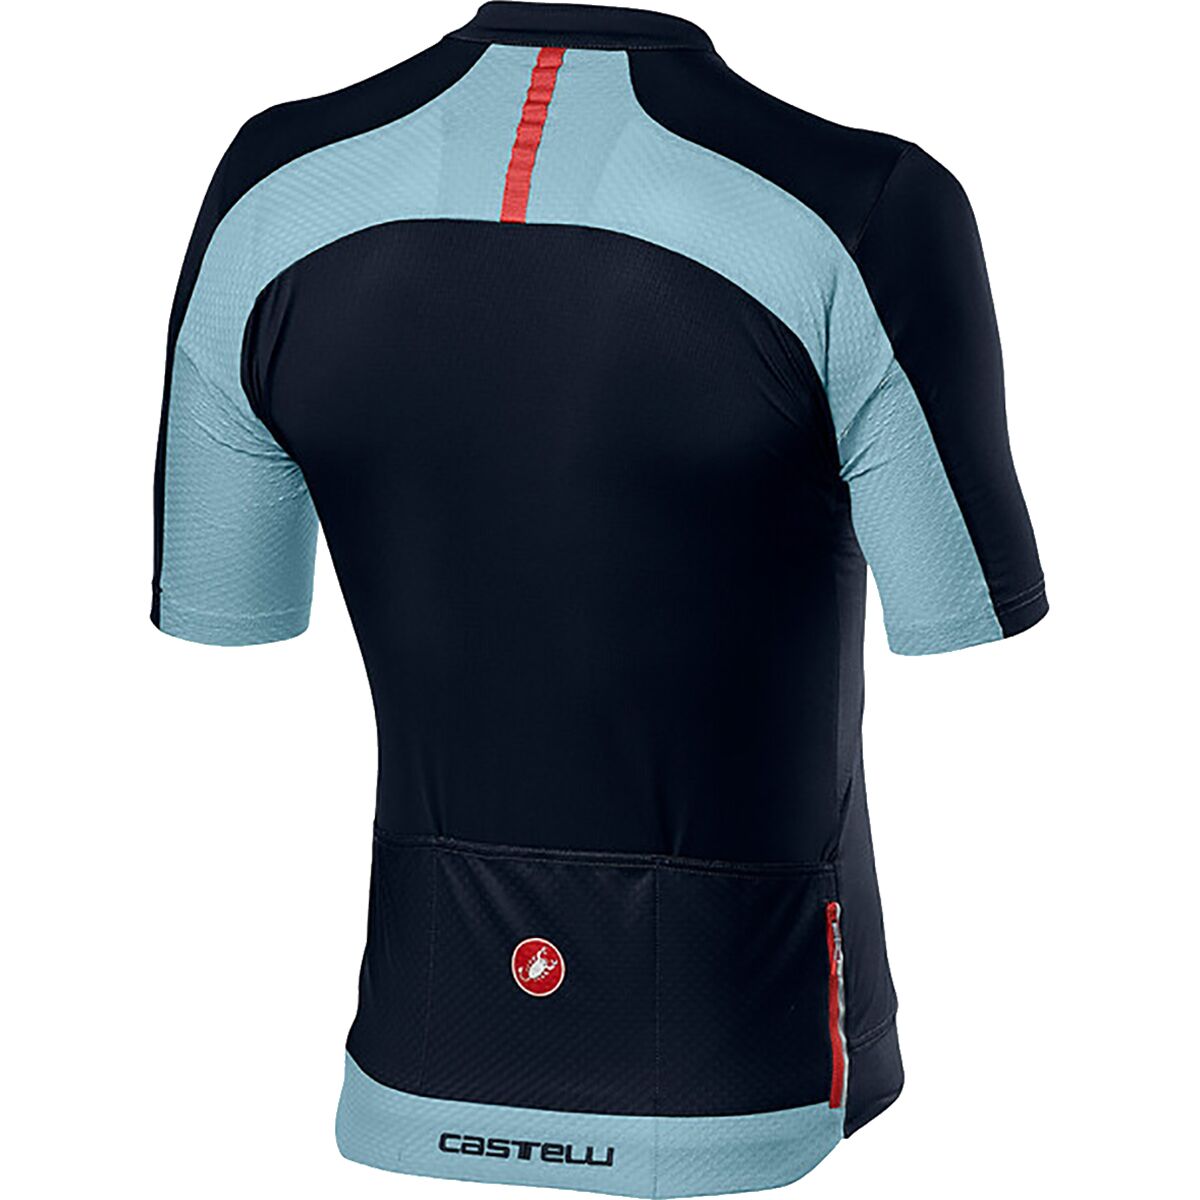 Details about   CASTELLI Maillot Vantaggio RED/BLACK 4520018656 Men’s Clothing Jerseys 